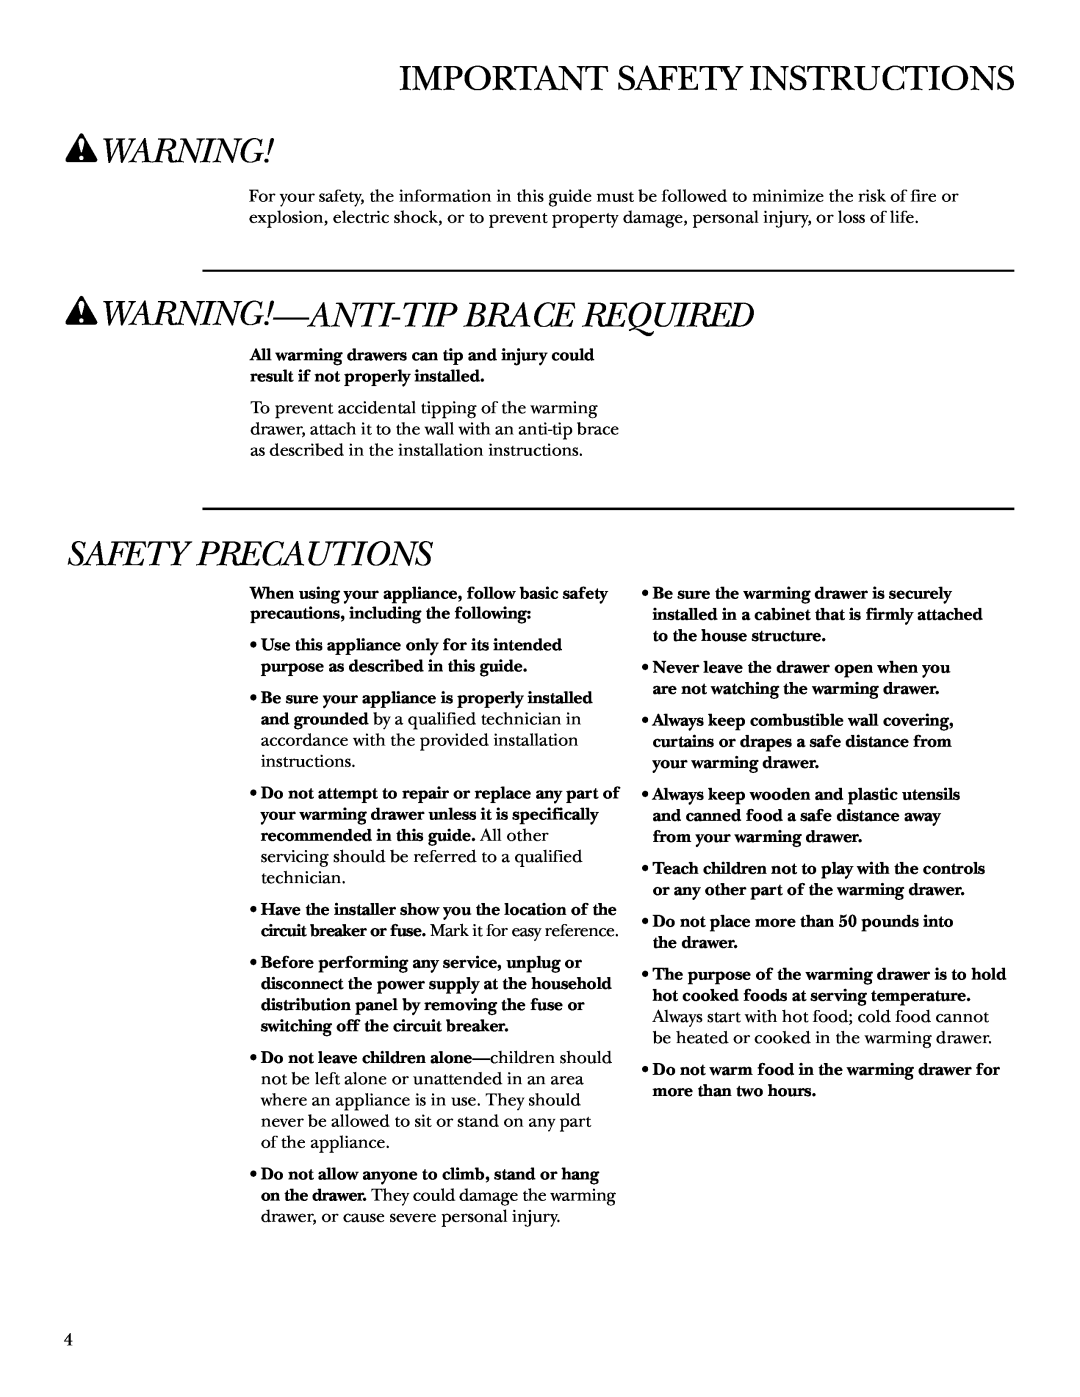 GE ZTD910 owner manual Important Safety Instructions, wWARNING!-ANTI-TIPBRACE REQUIRED, Safety Precautions 